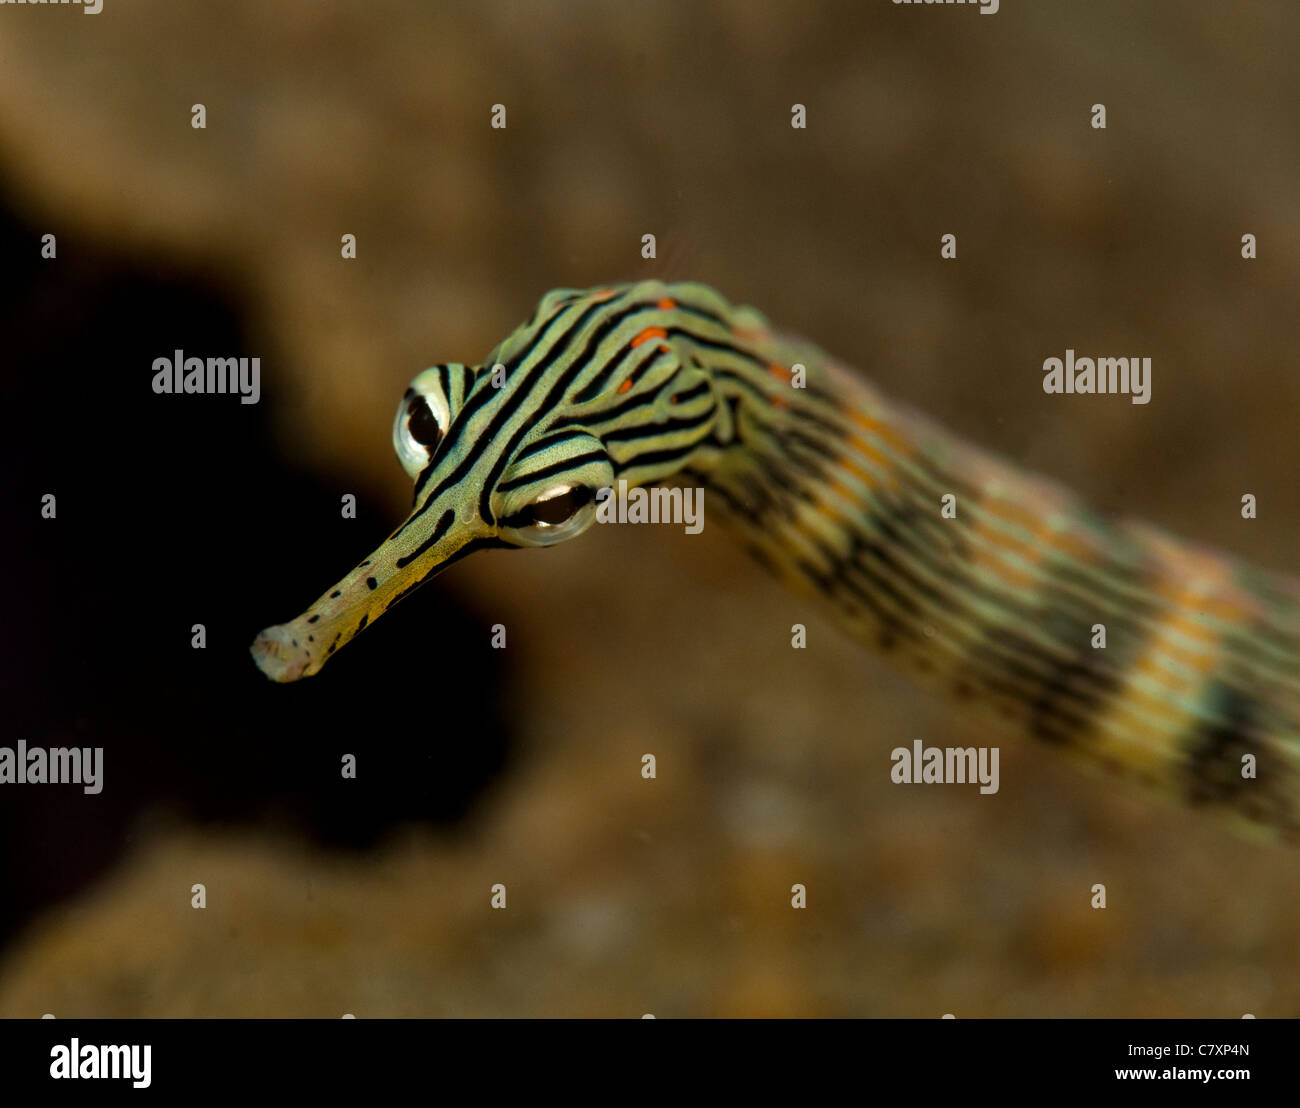 Yellow-banded pipefish in the Lembeh Straits, Indonesia Stock Photo